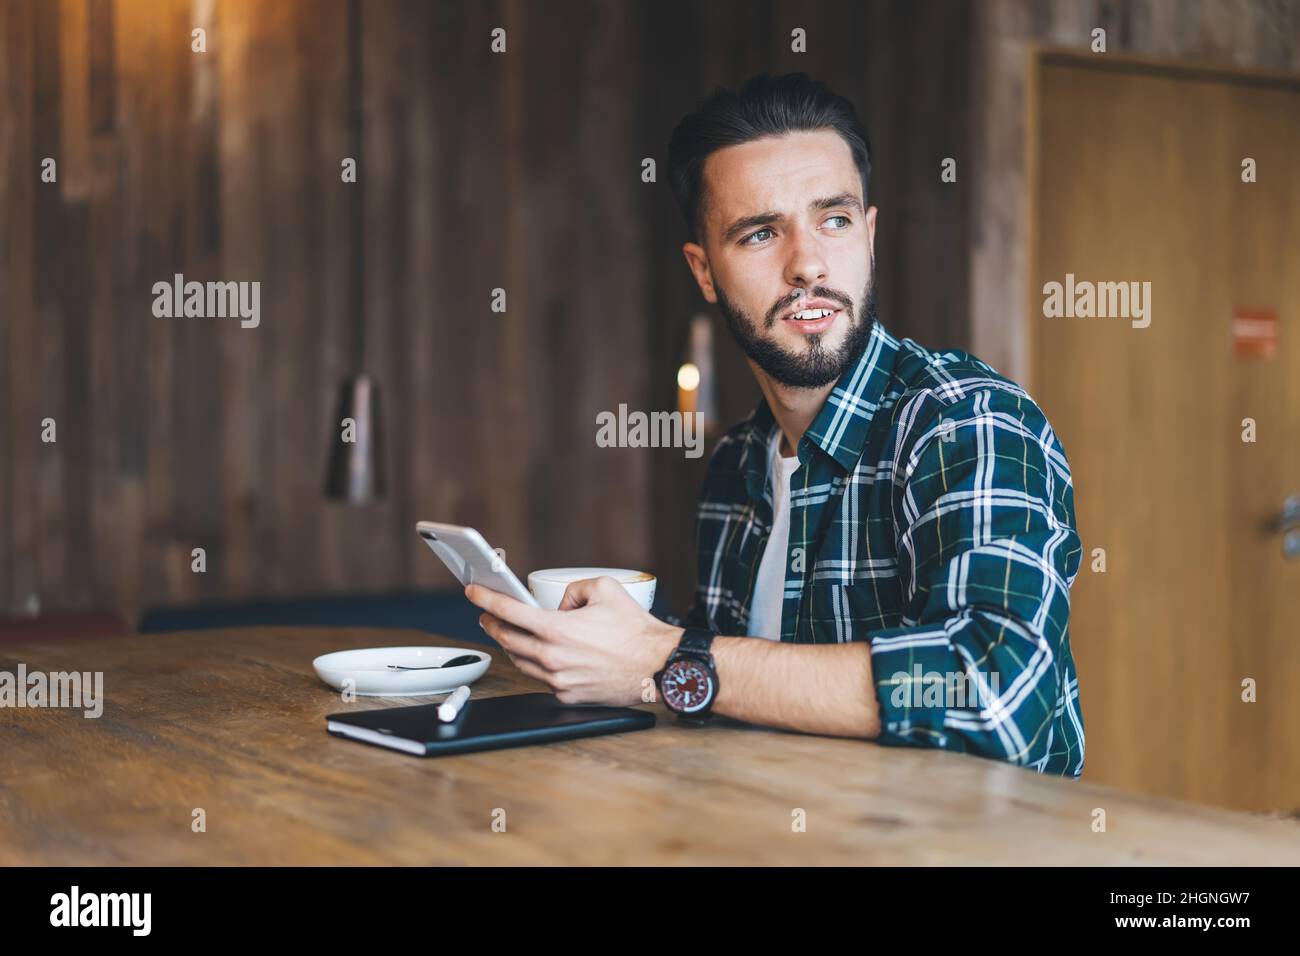 Caucaisan male blogger using smartphone application during coffee time in cafe interior Stock Photo